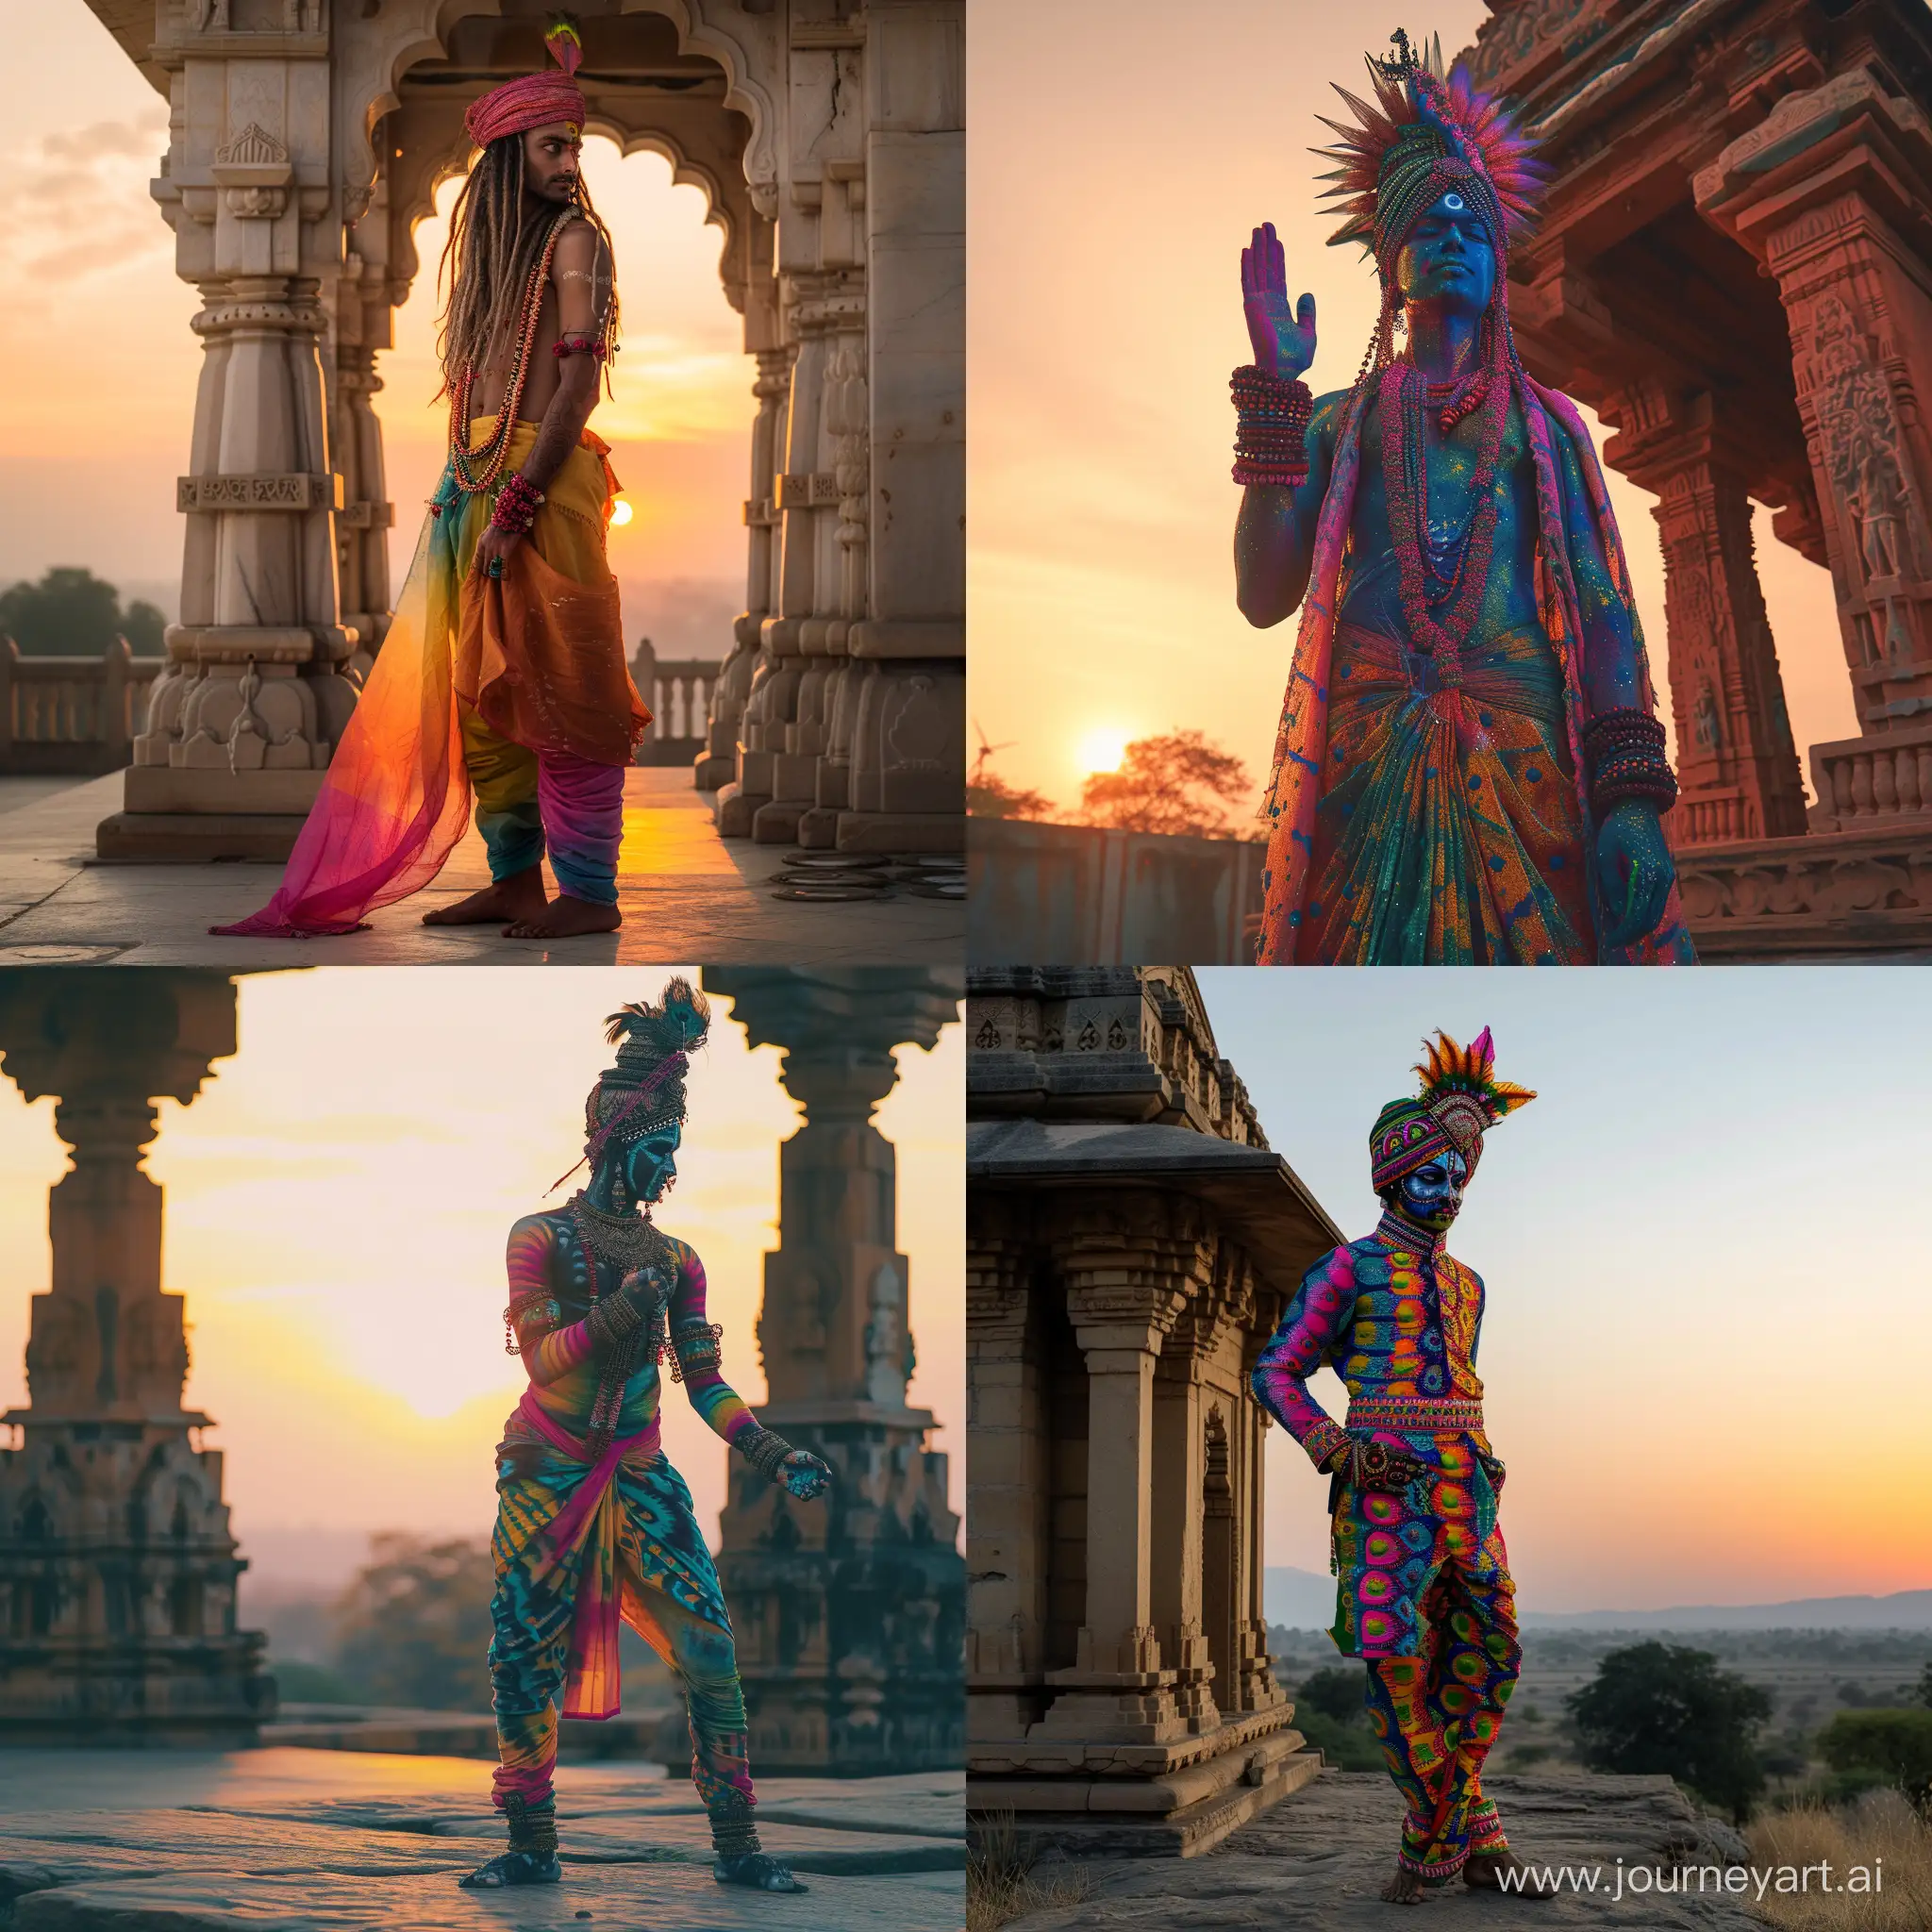 Vibrant-Kaliboy-in-Colorful-India-Standing-by-Old-Temple-at-Sunset